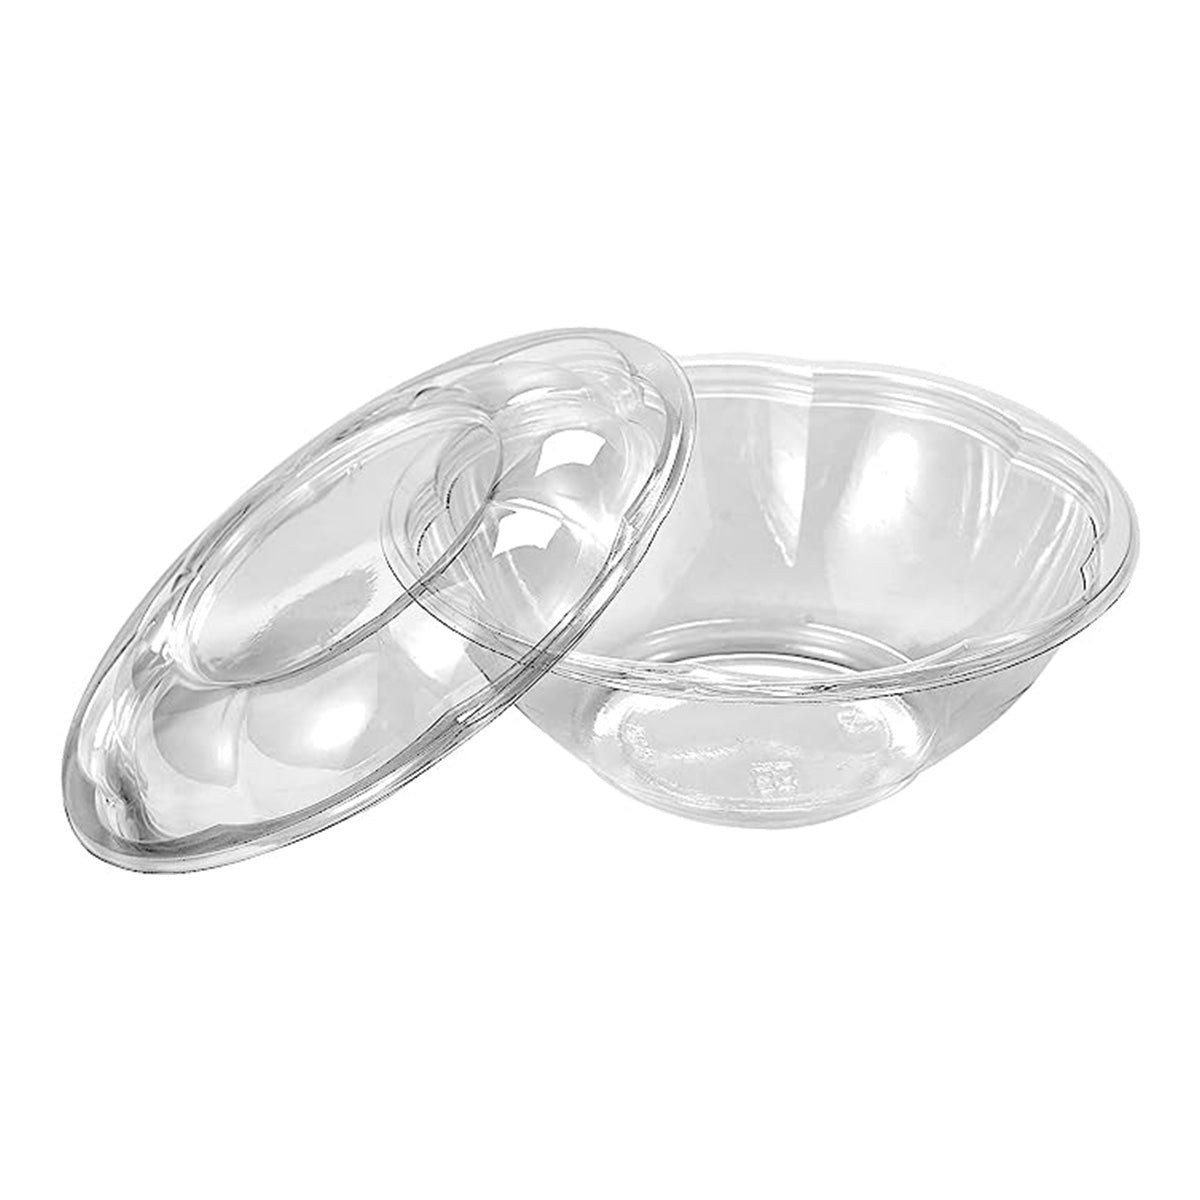 CIAO! 24 oz Clear PET Fruit and Salad Bowl with Rose Dome Lid (150/case)